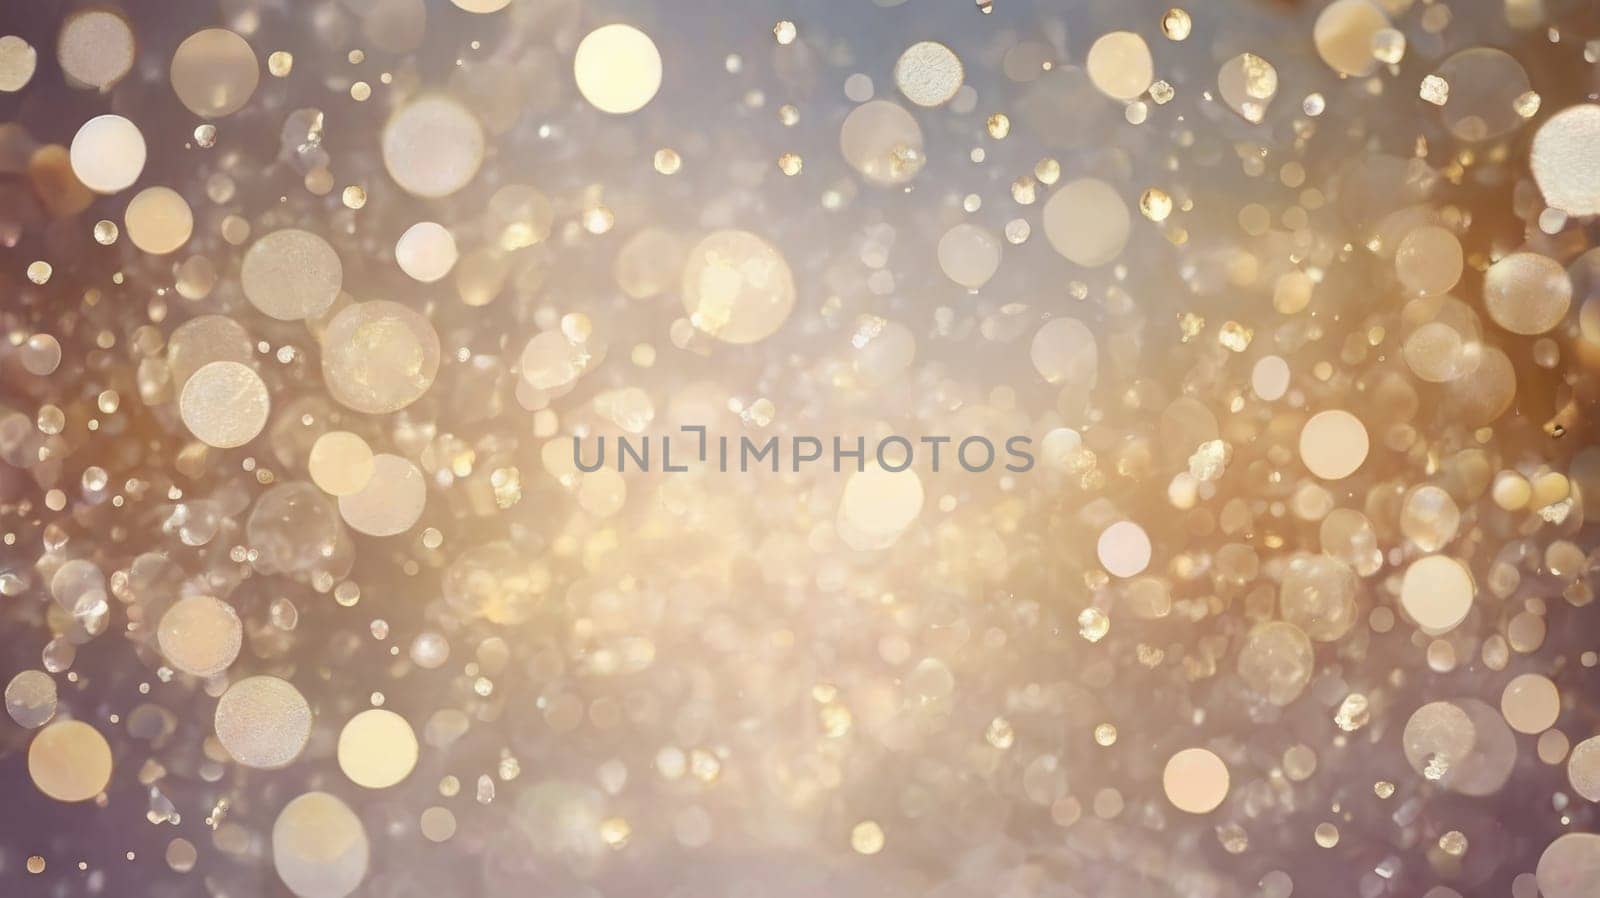 Blurred glitter effects background. Bright soft blue with hints of pearl color. Christmas background.